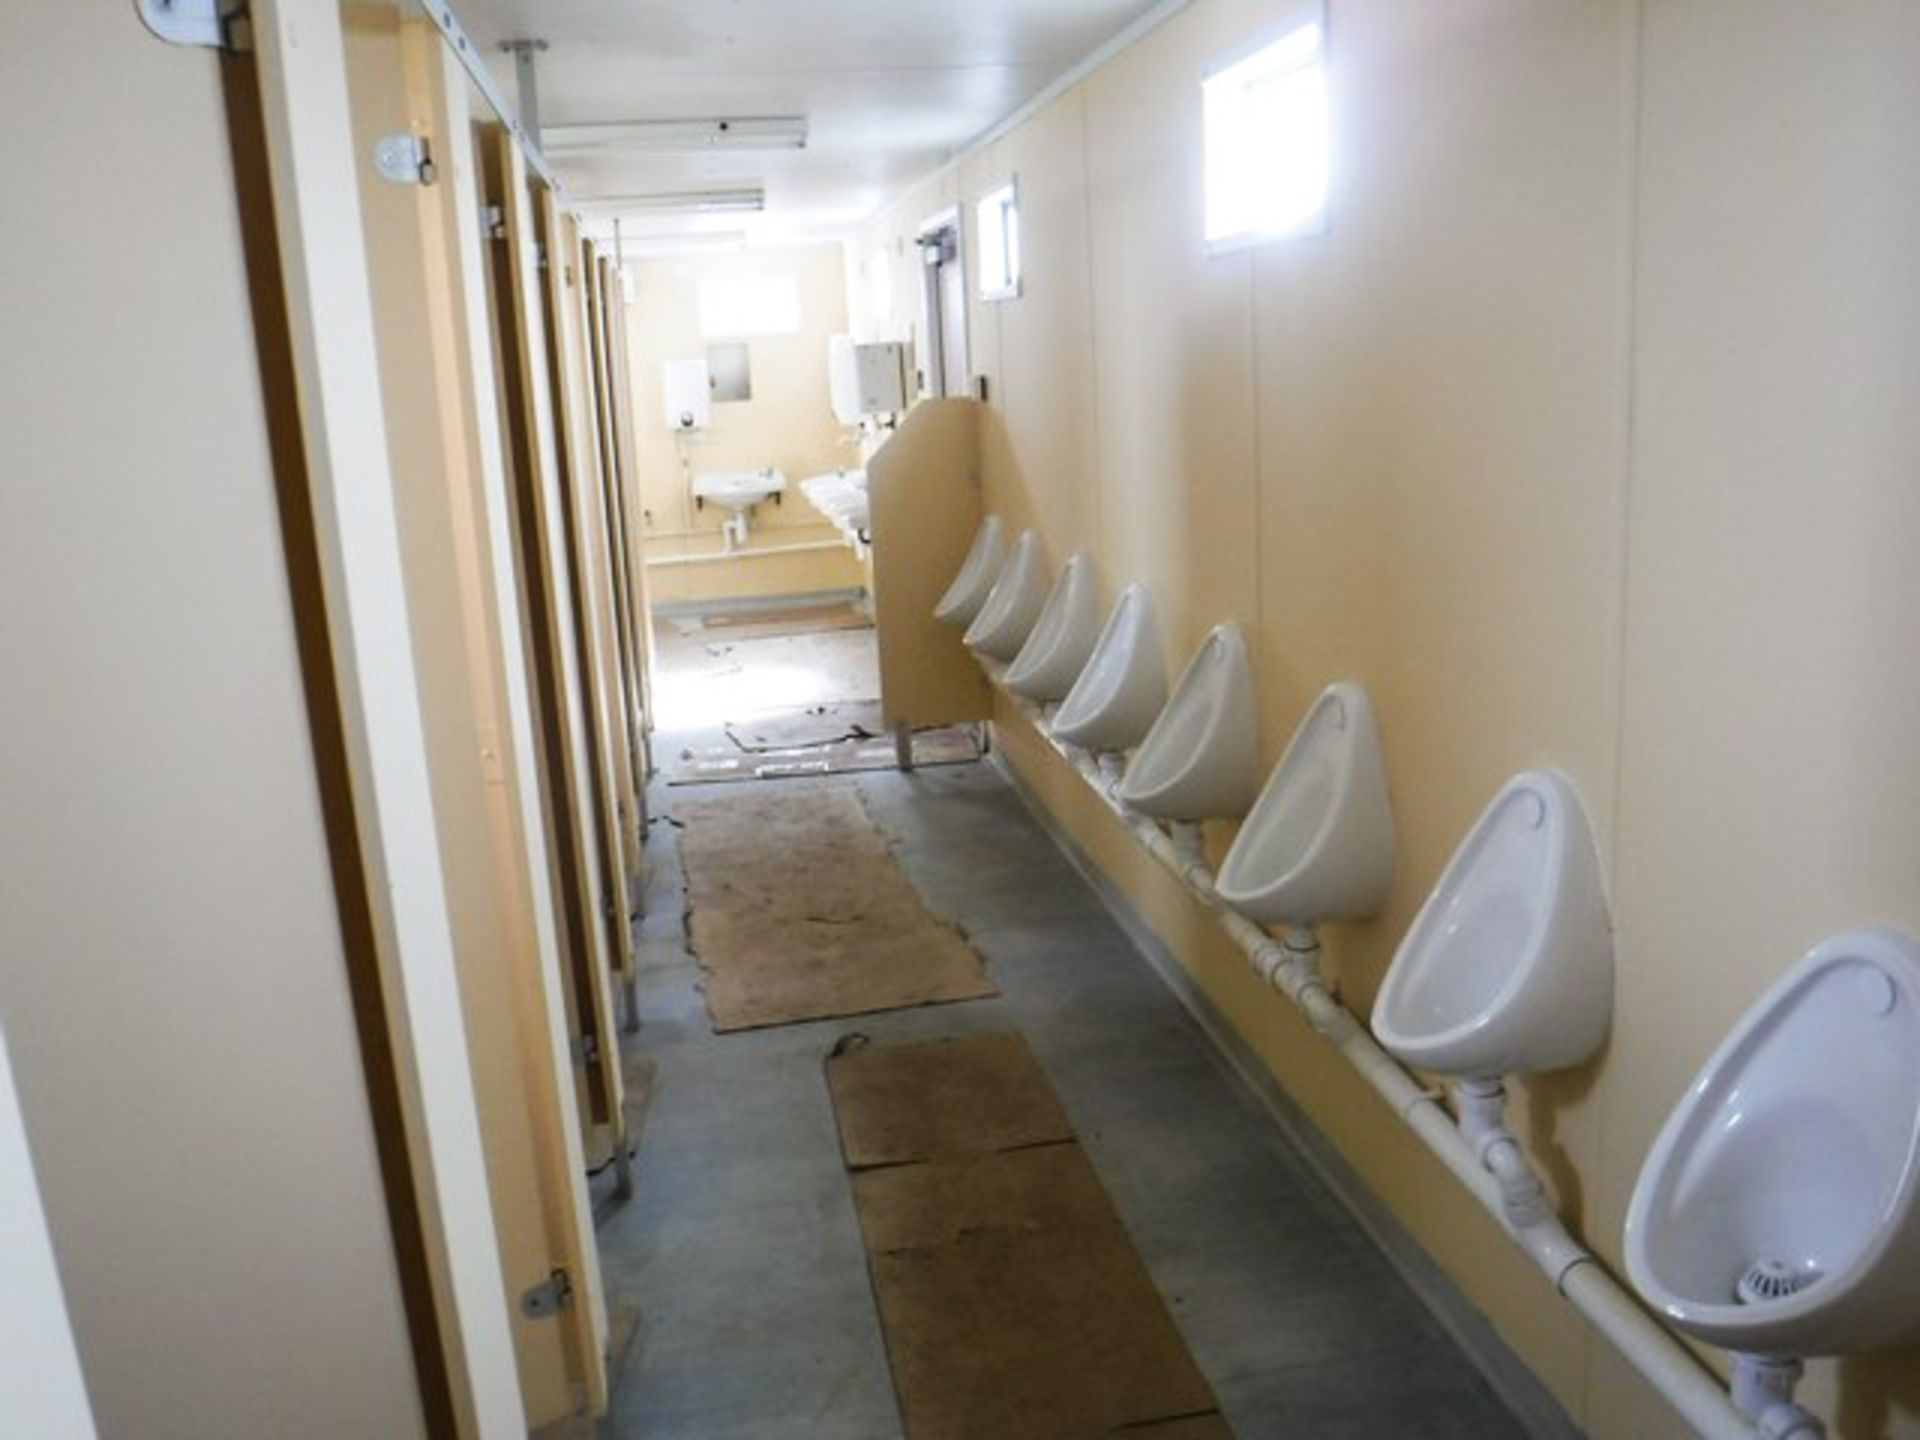 40 X 10 TOILET BLOCK, C/W 10 CUBICALS, 10 URINALS, 9 SINKS, WATER HEATERS TEMP CONTROLLED ANTI-FREEZ - Image 9 of 9